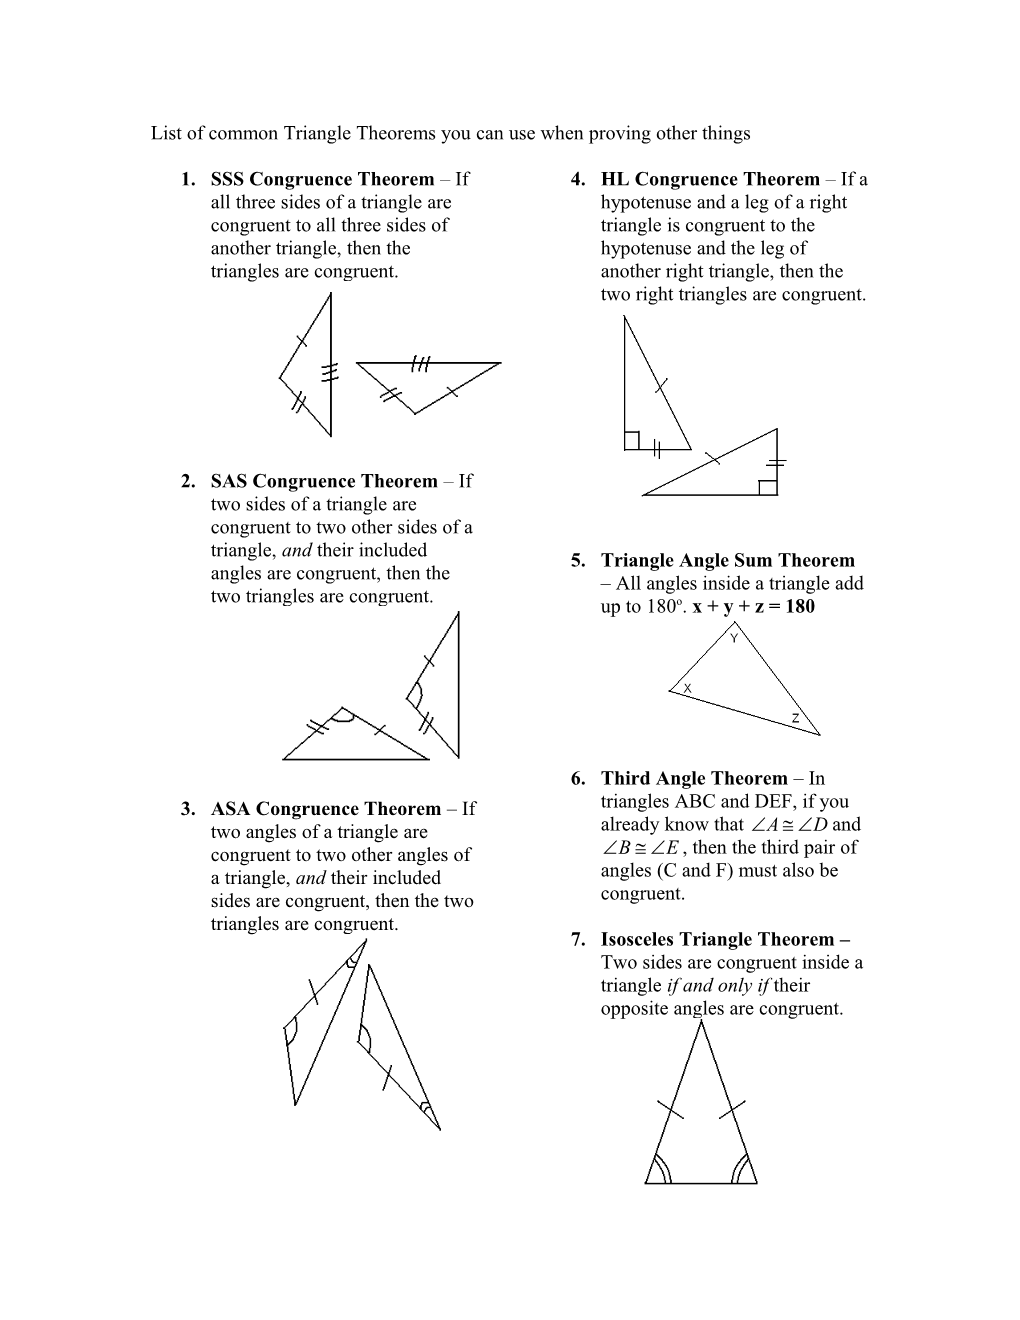 List of Common Triangle Theorems You Can Use When Proving Other Things